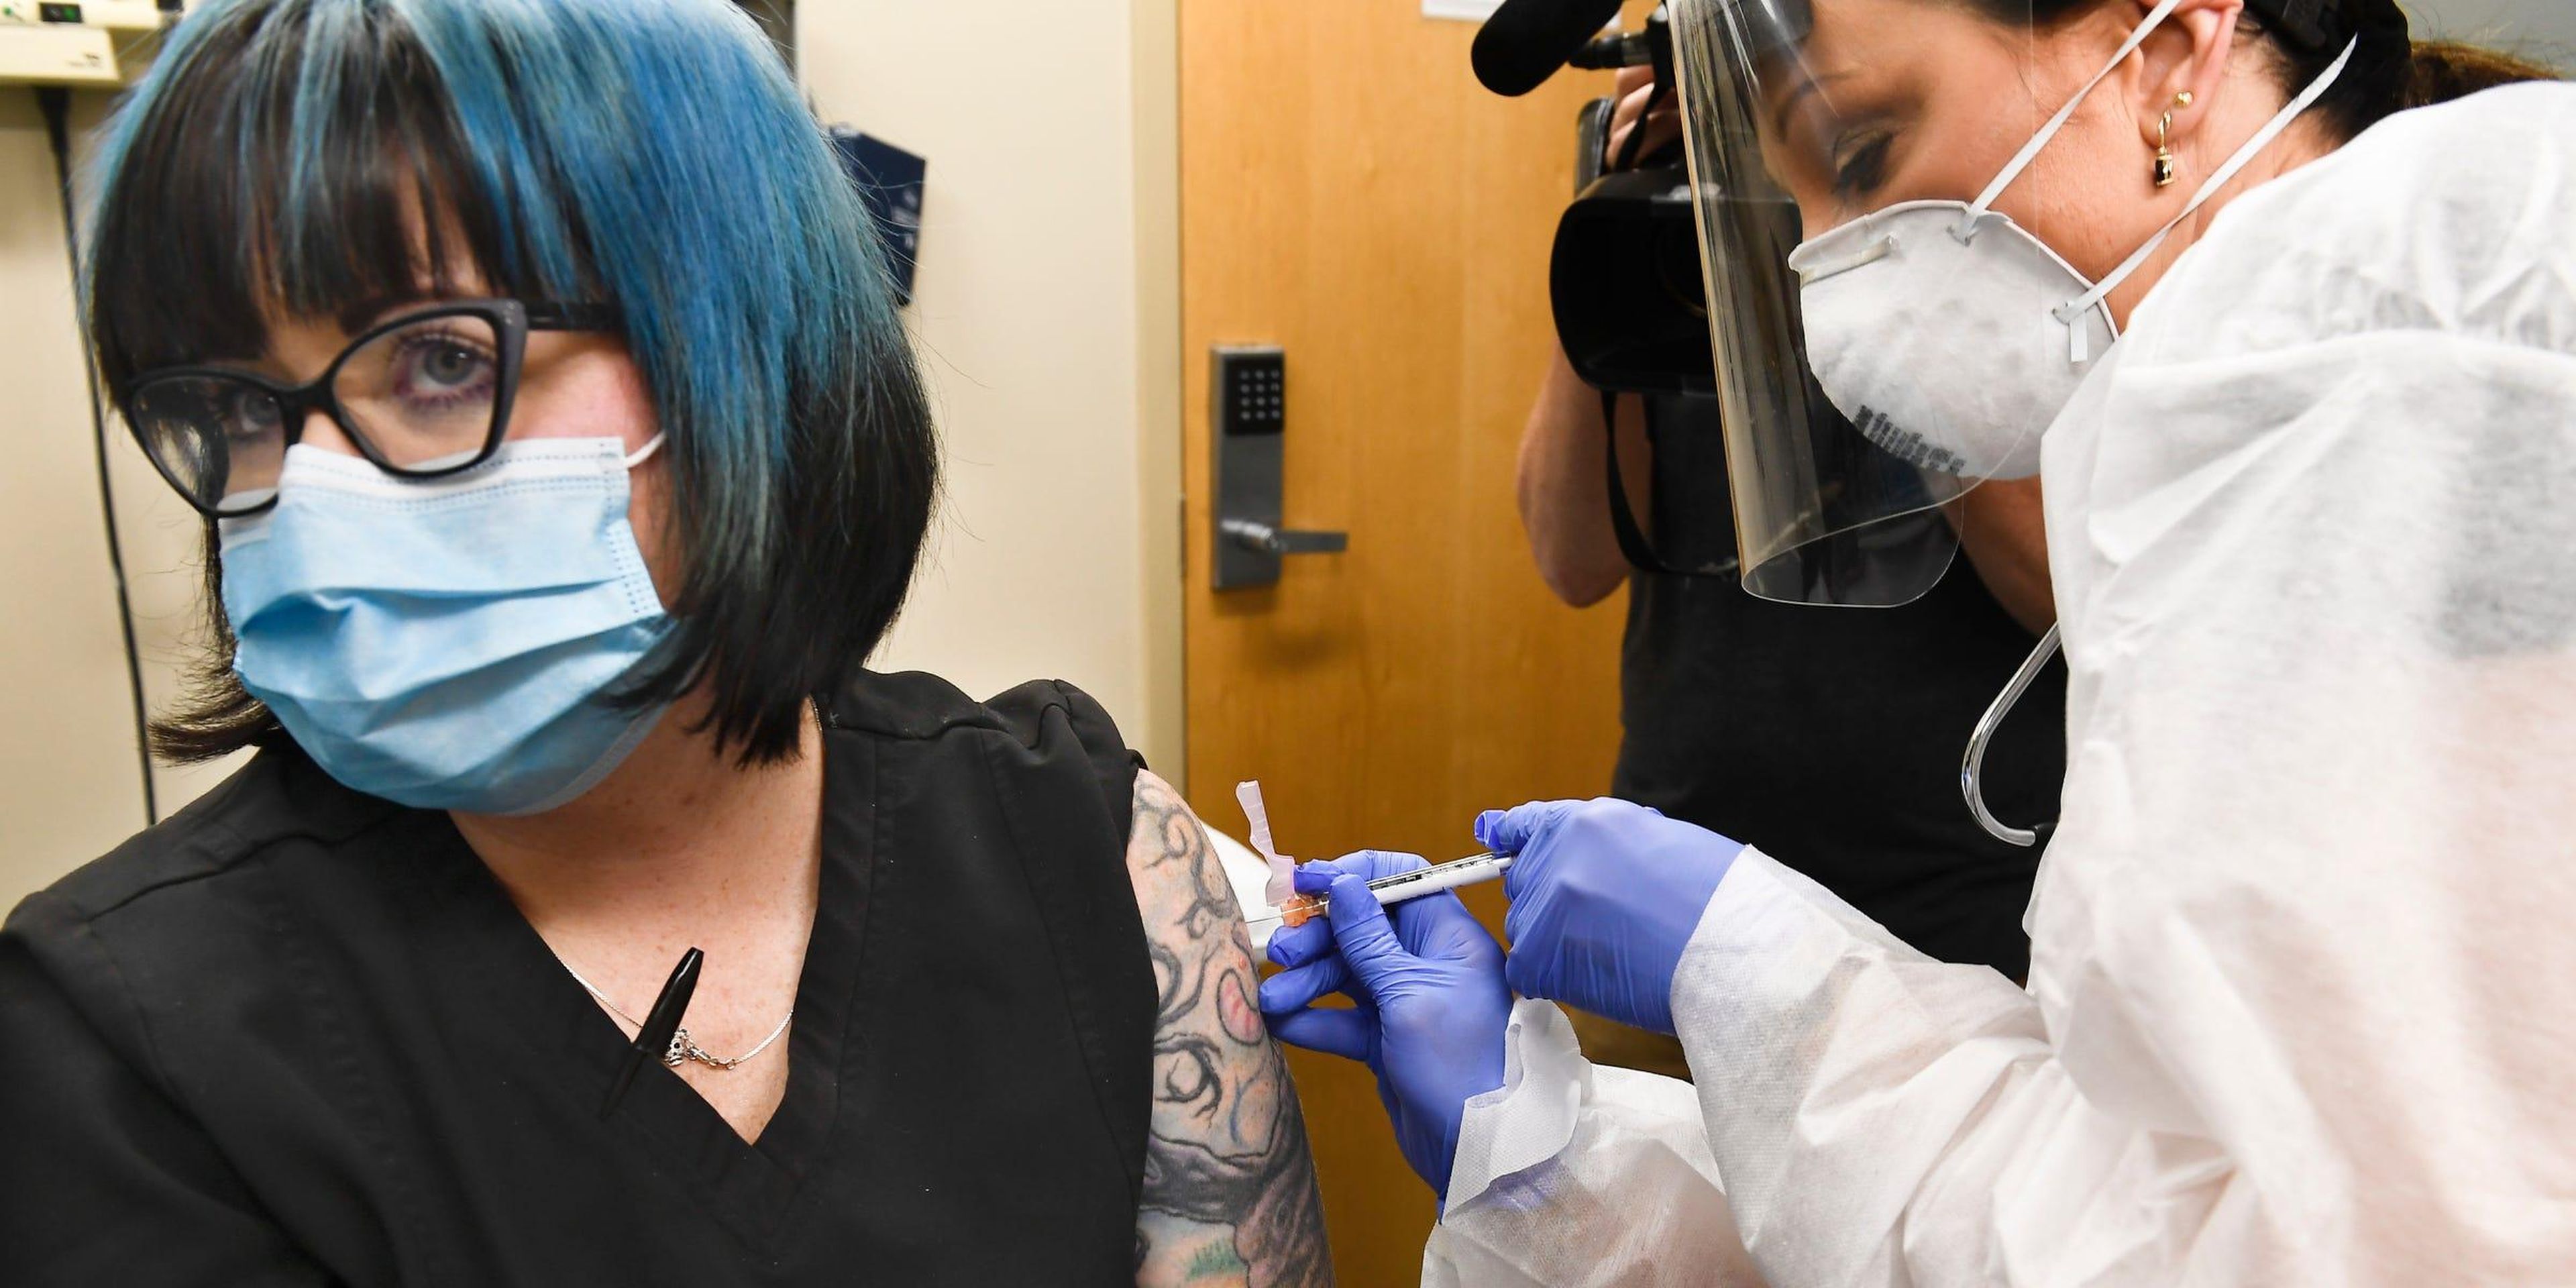 A volunteer is injected with a trial vaccine from Moderna Inc. in Binghamton, New York, on July 27, 2020. AP Photo/Hans Pennink